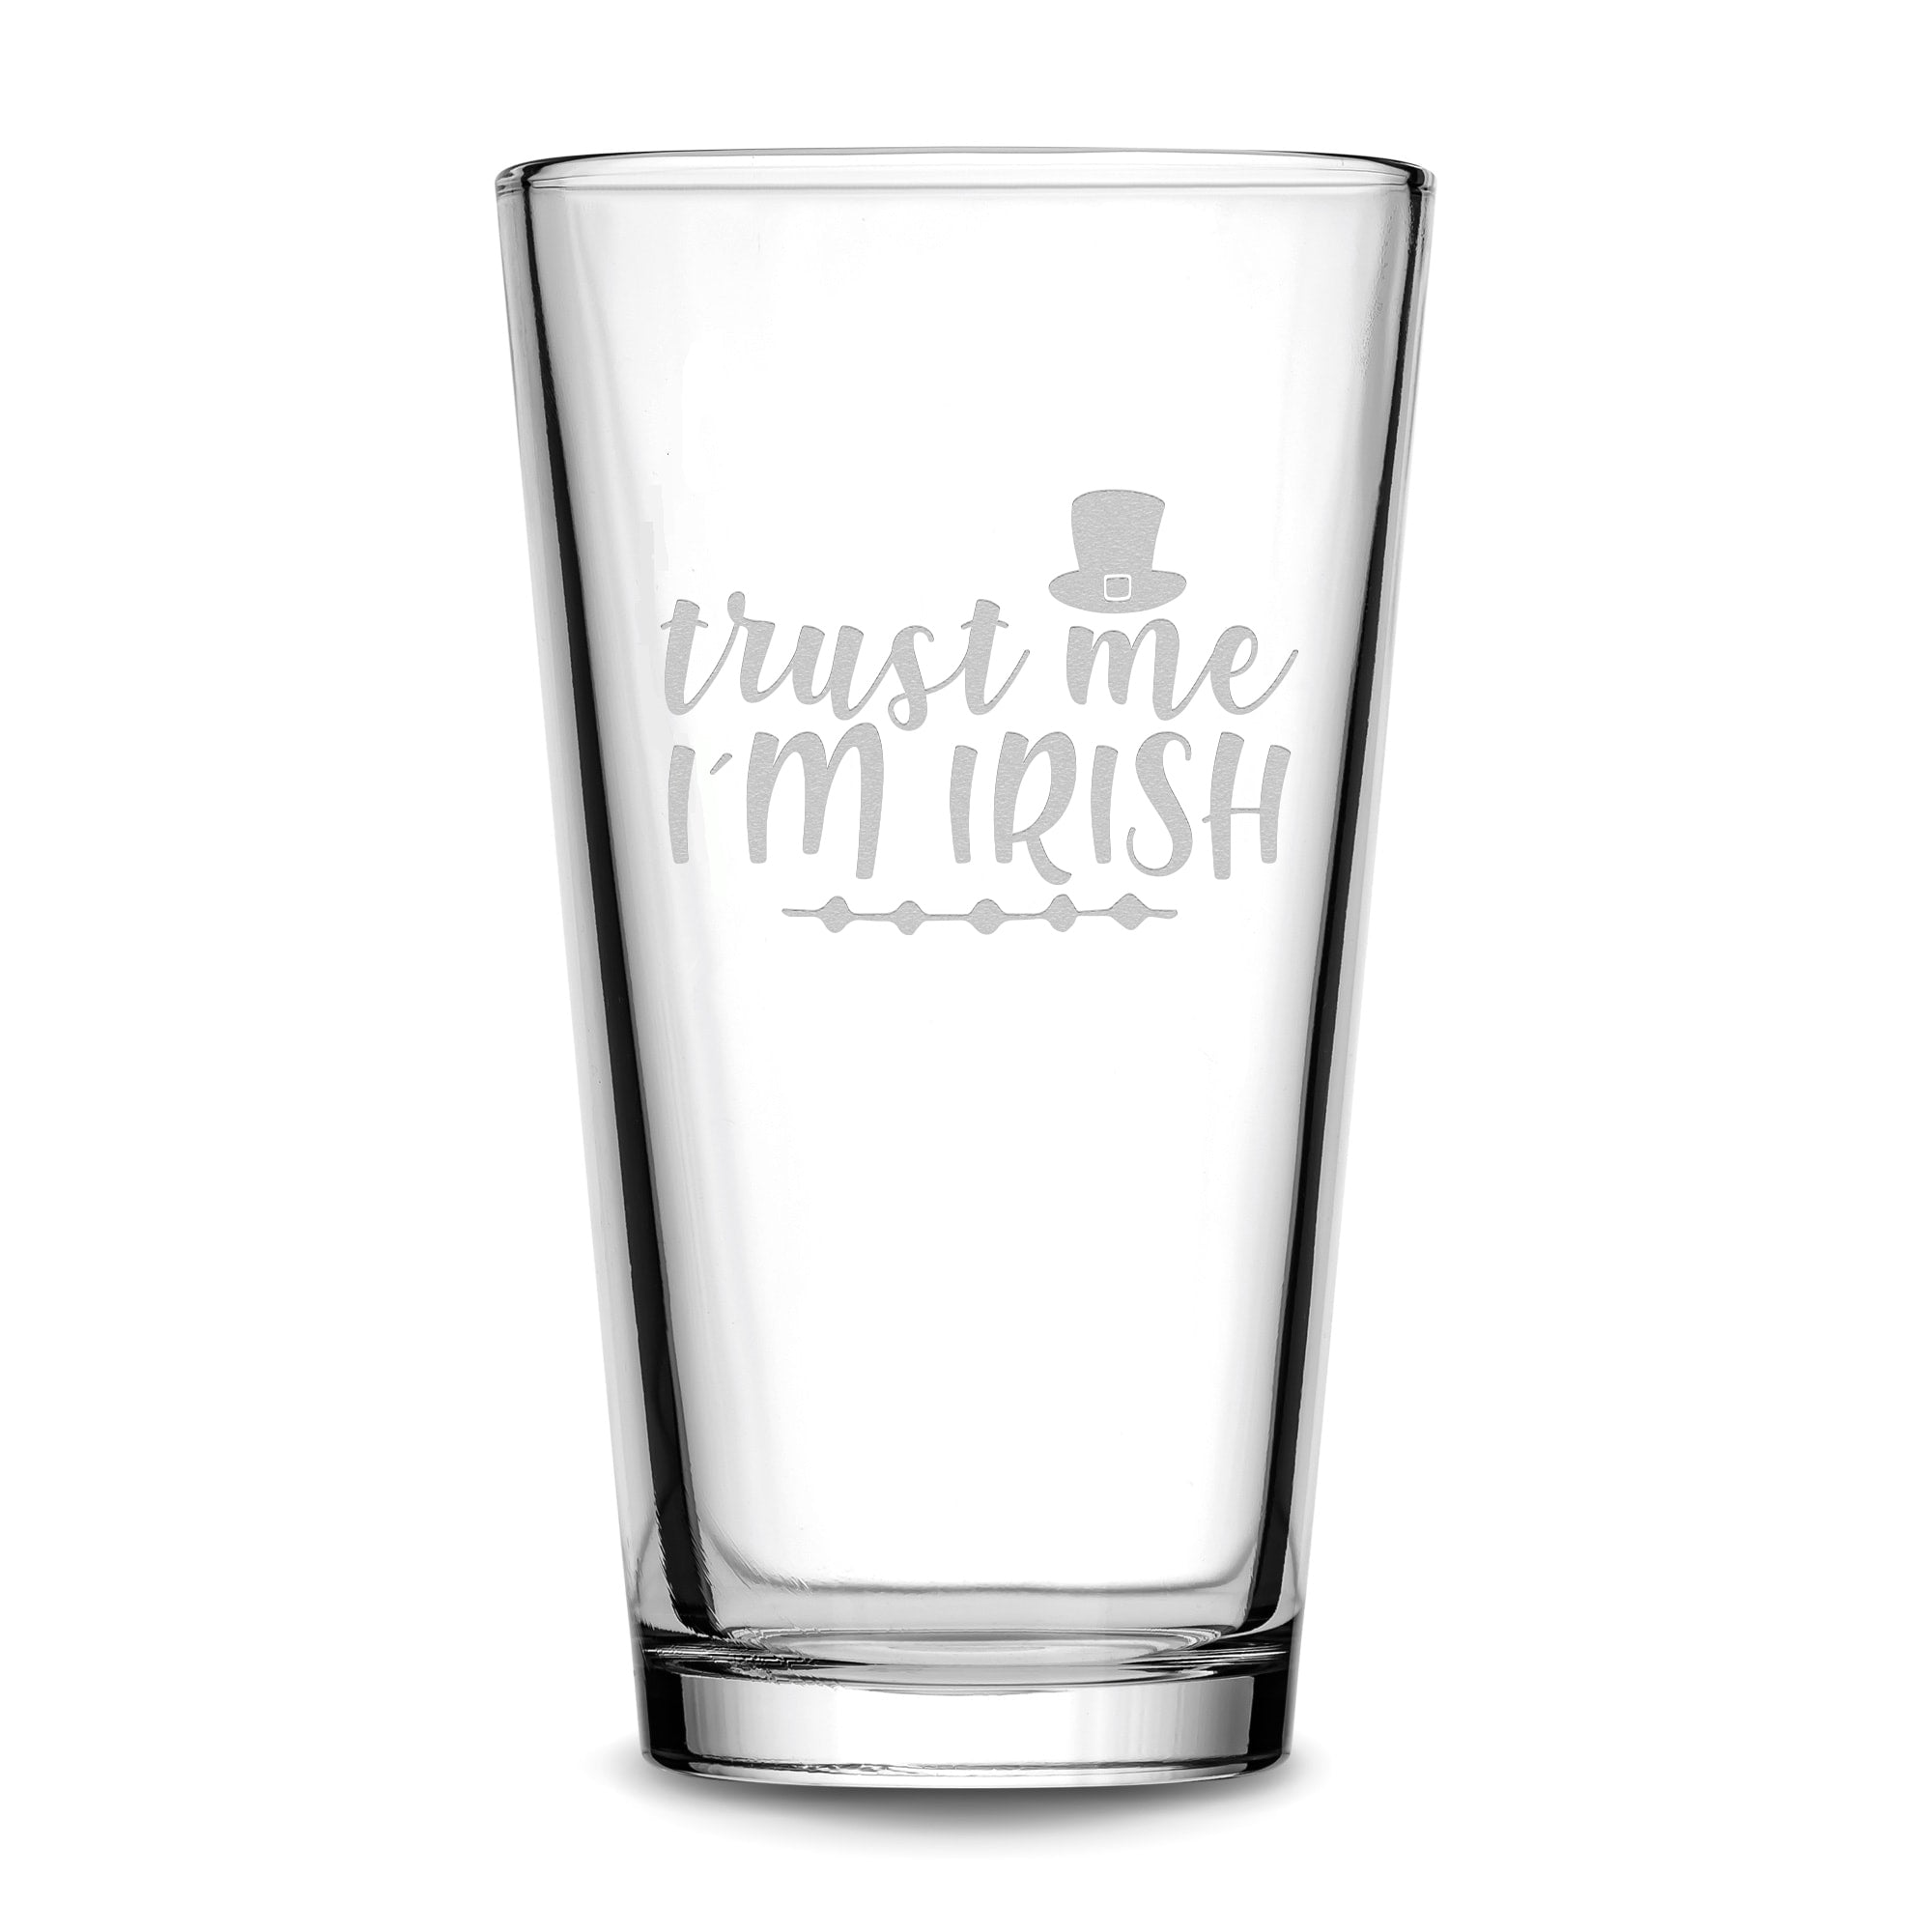 Premium Etched Pint Glass, Trust Me I'm Irish, 16oz, Laser Etched or Hand Etched